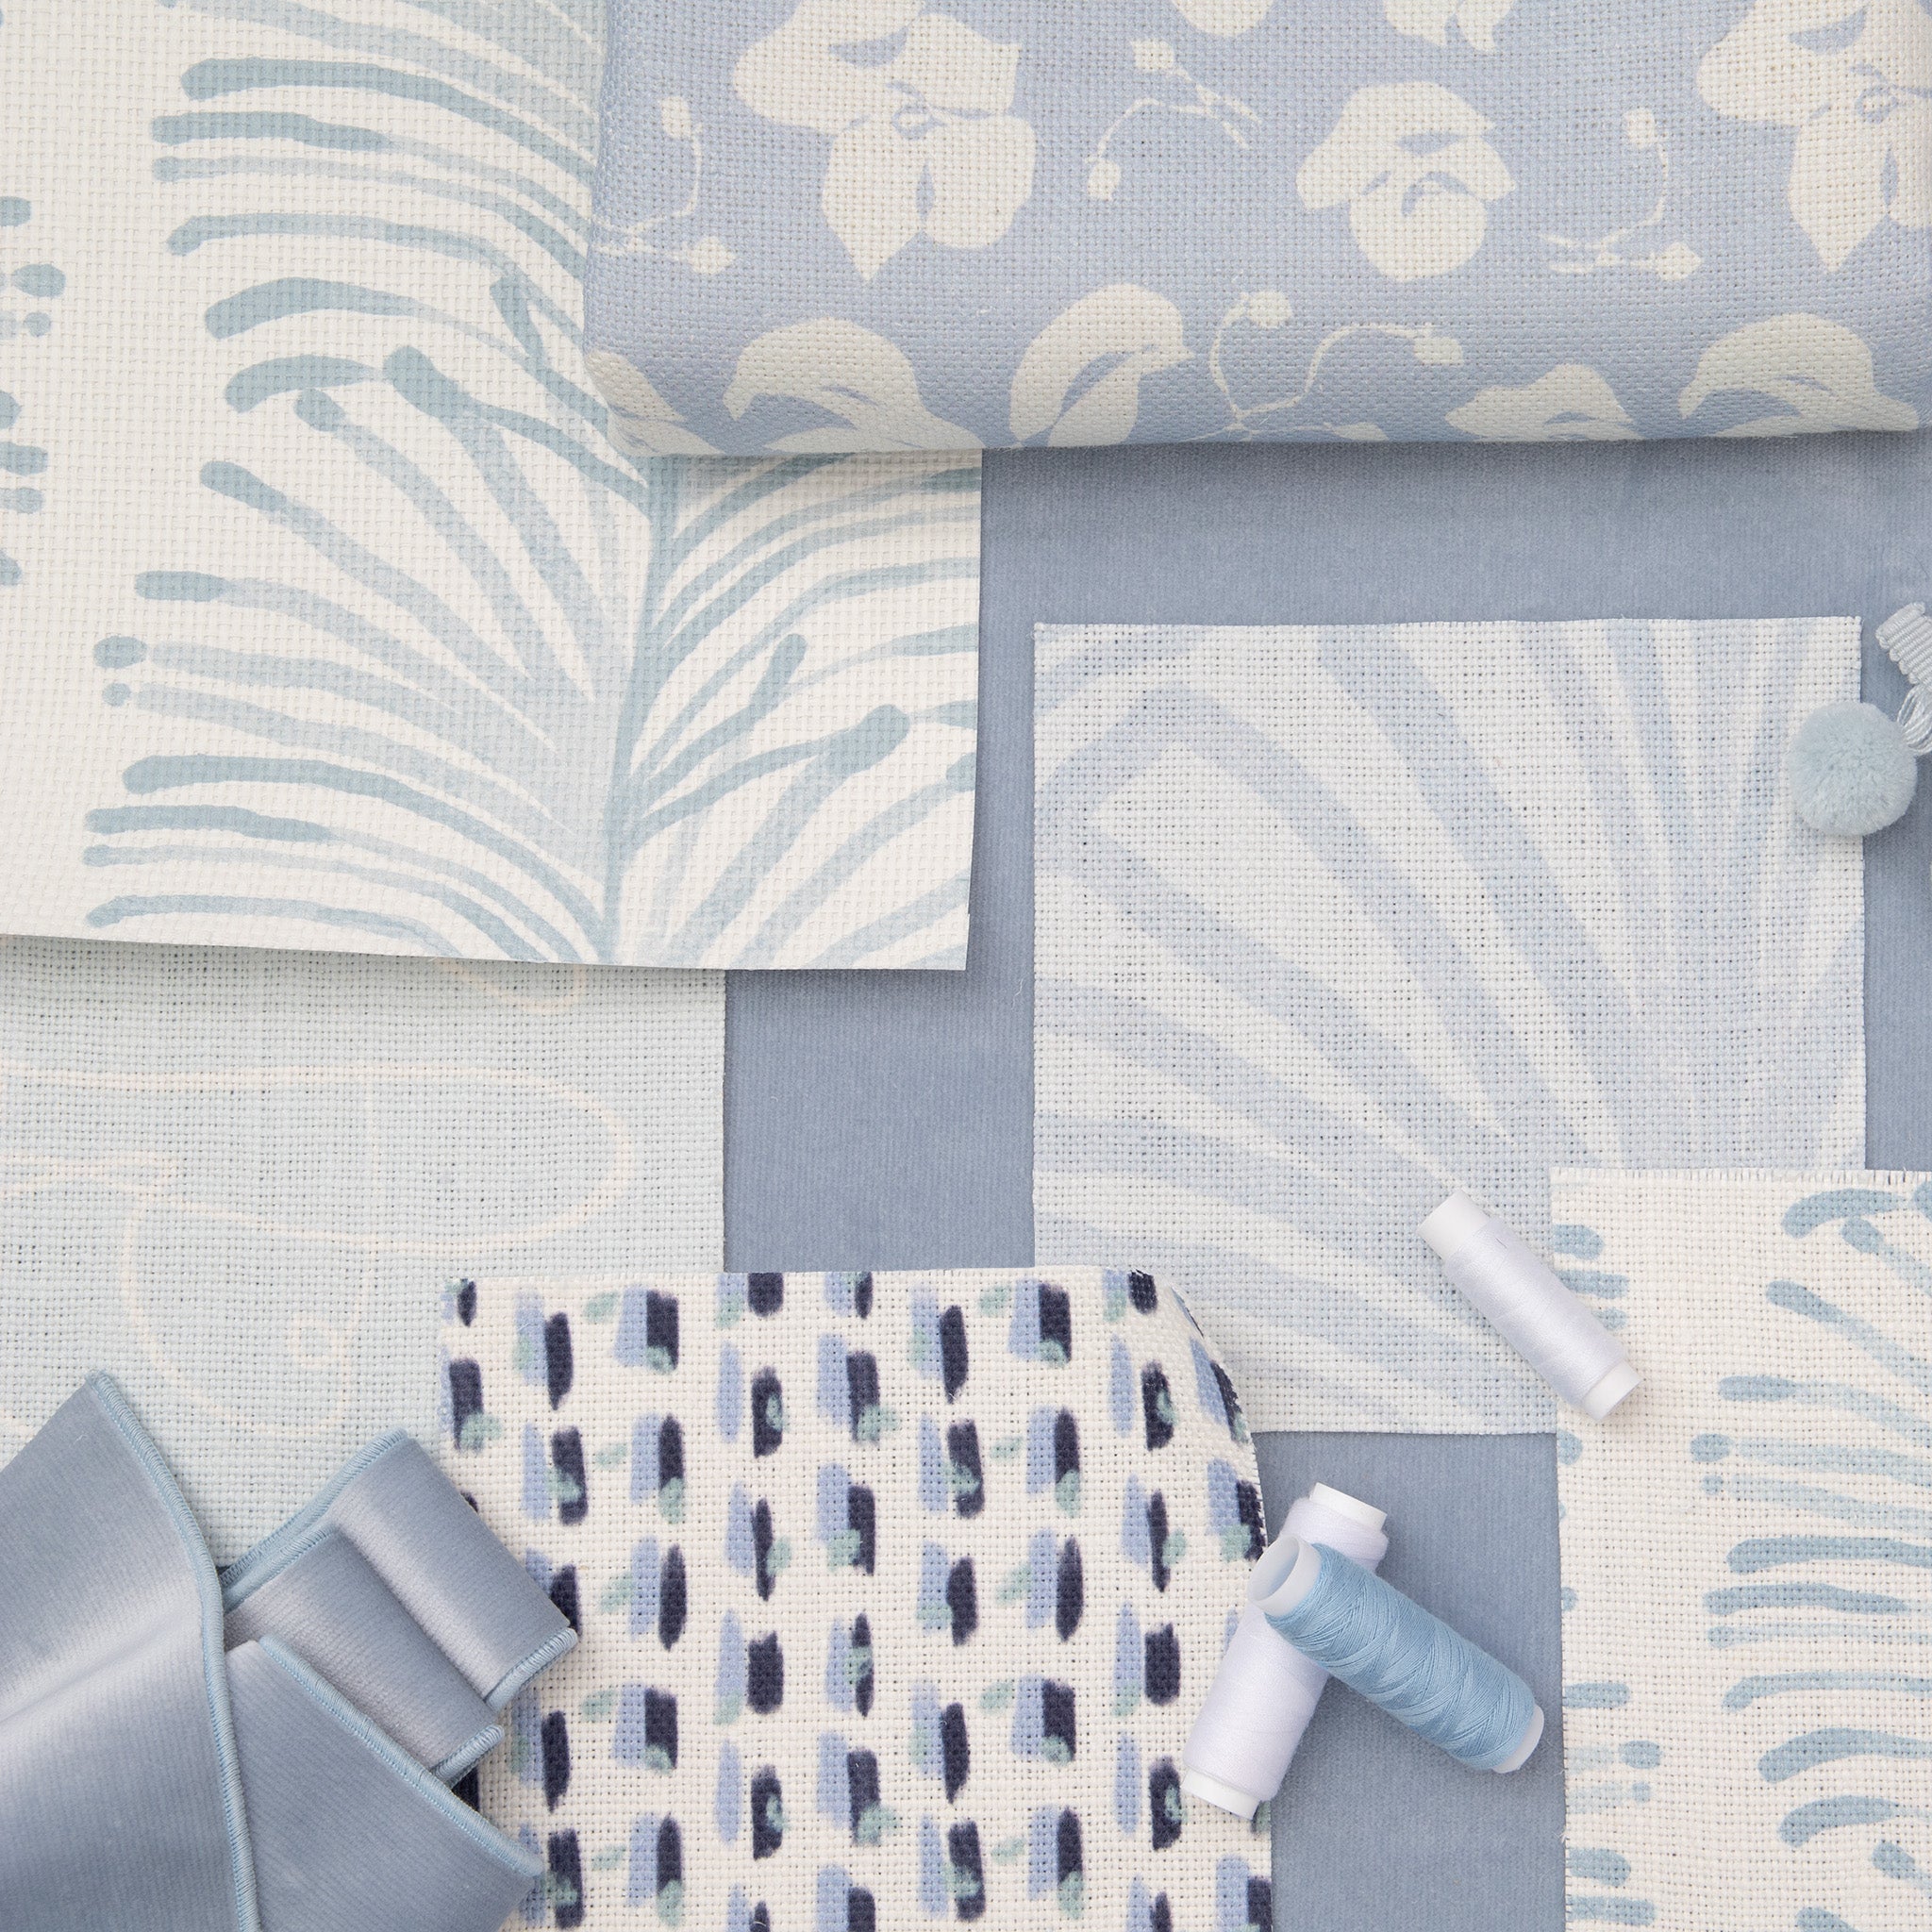 Interior design moodboard and fabric inspirations with Cornflower Blue Floral Printed Linen Swatch, Sky Blue Palm Printed Linen Swatch, Sky and Navy Blue Poppy Printed Linen Swatch, and Sky Blue Botanical Stripe Printed Swatch